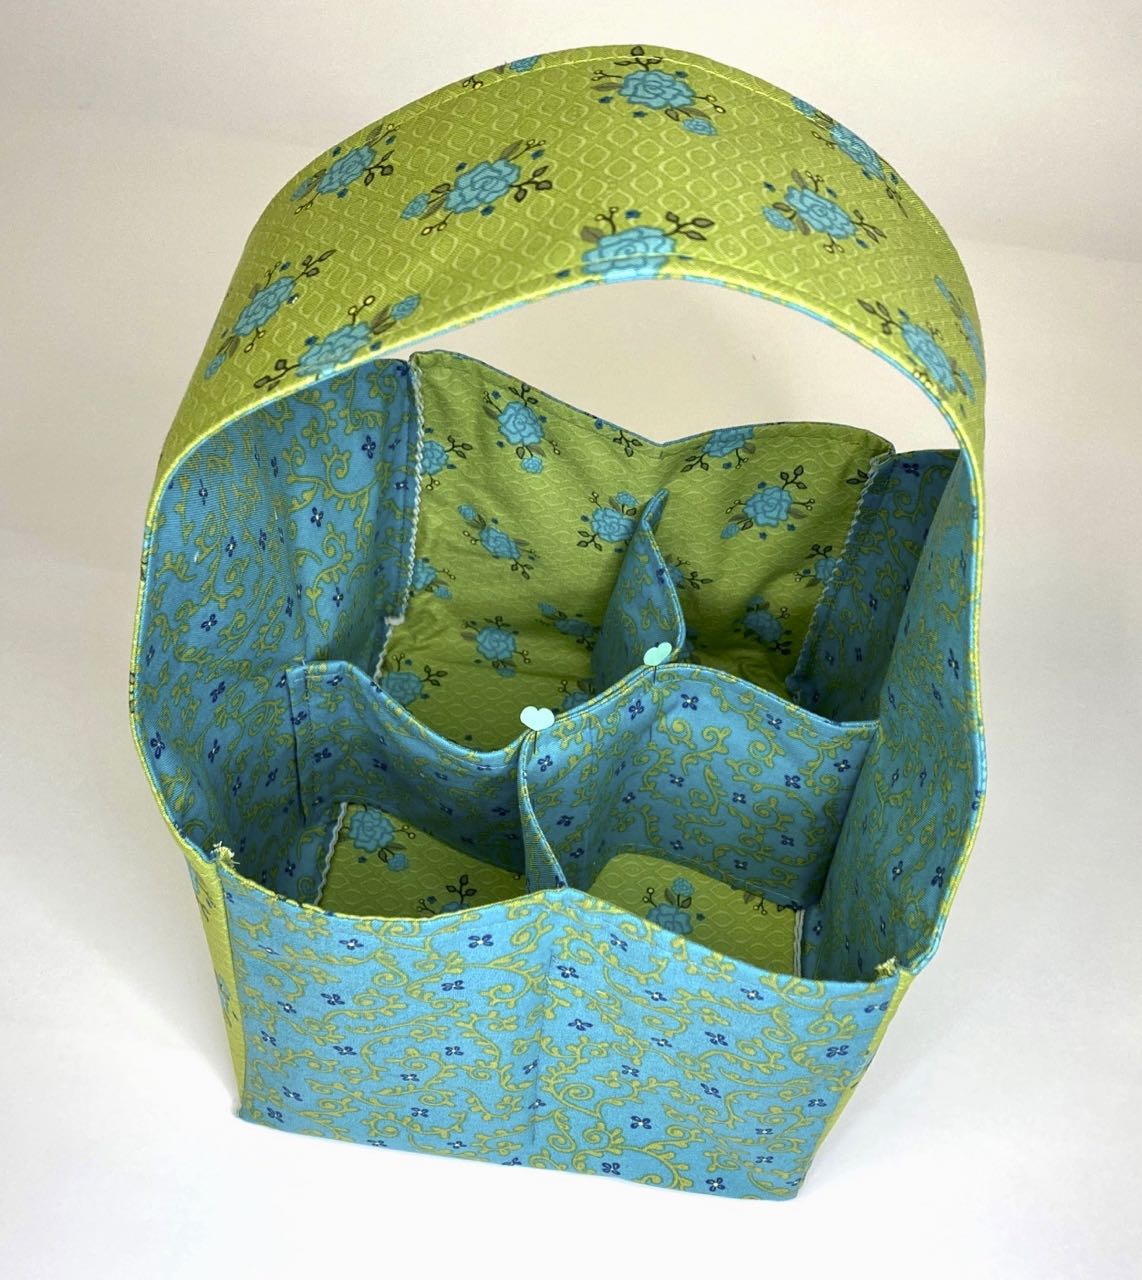 Fun Fabric Caddy Sewing Tutorial at the Nancy Zieman Productions Blog Featuring Wildflower Boutique Fabrics by Riley Blake Designs